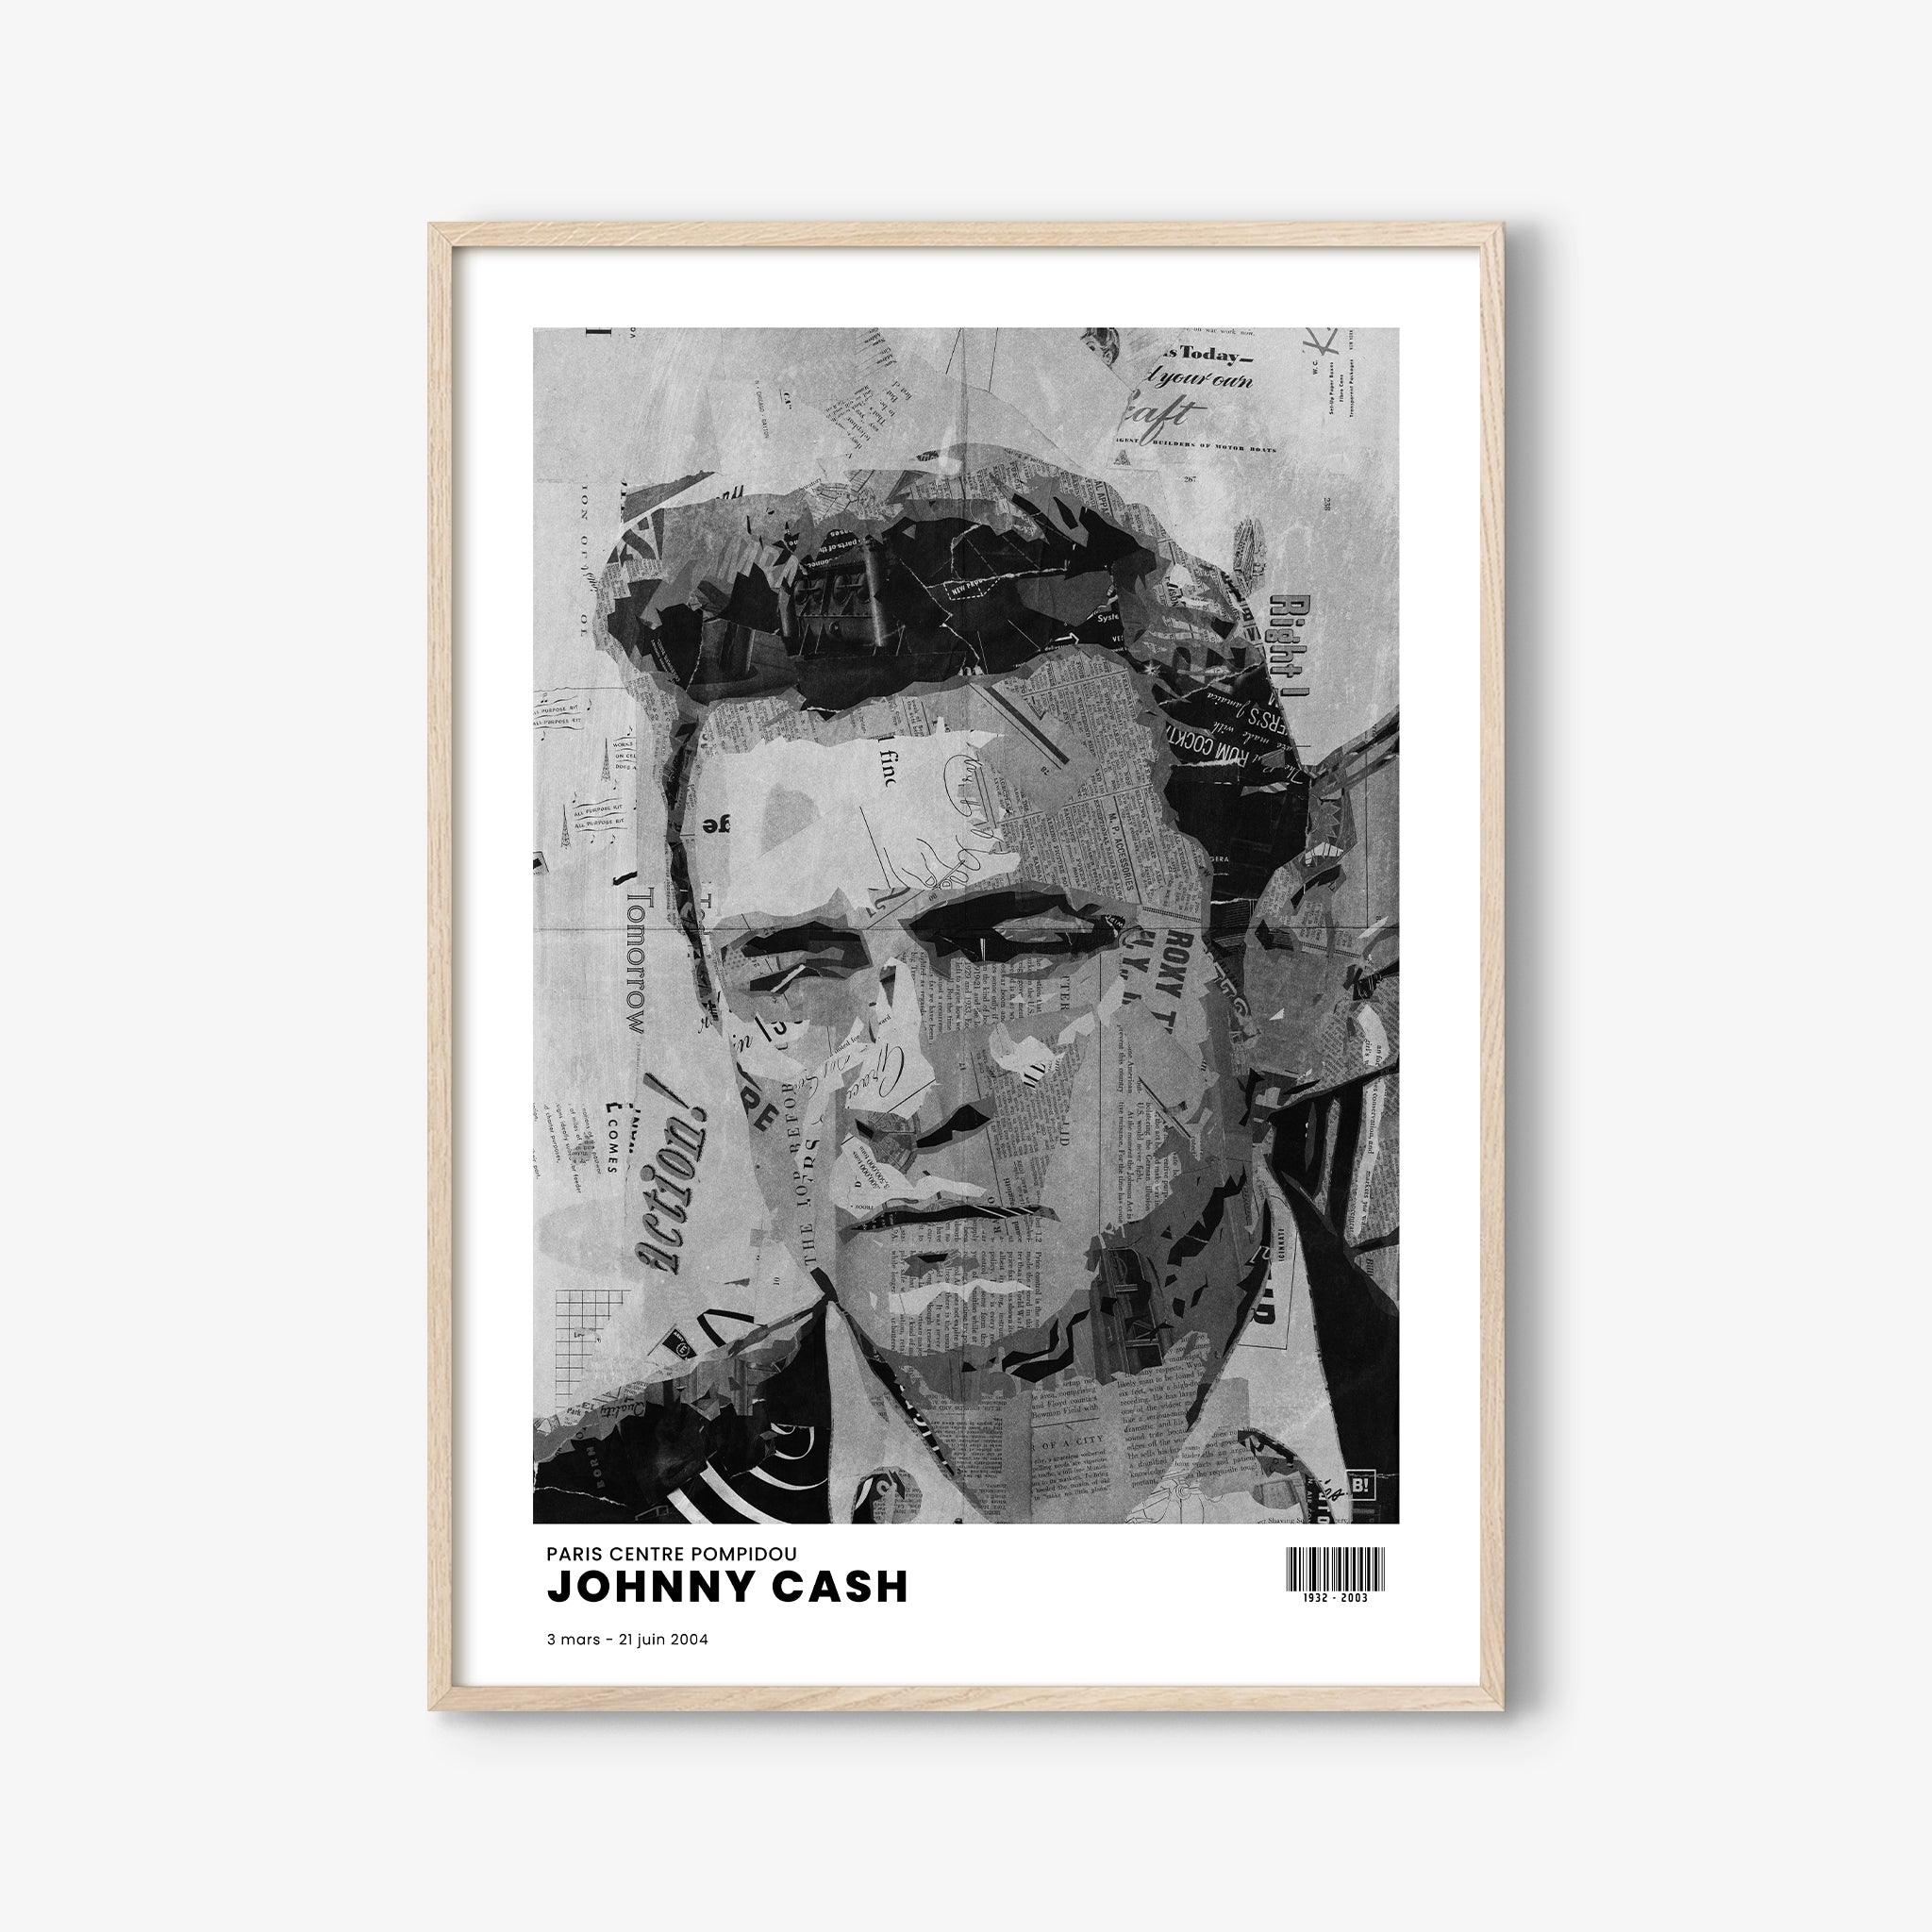 Be inspired by Iconic Johnny Cash Paris Centre Pompidou Exhibition Art Print. The artwork is presented in a white oak frame that captures its timeless beauty in every detail.